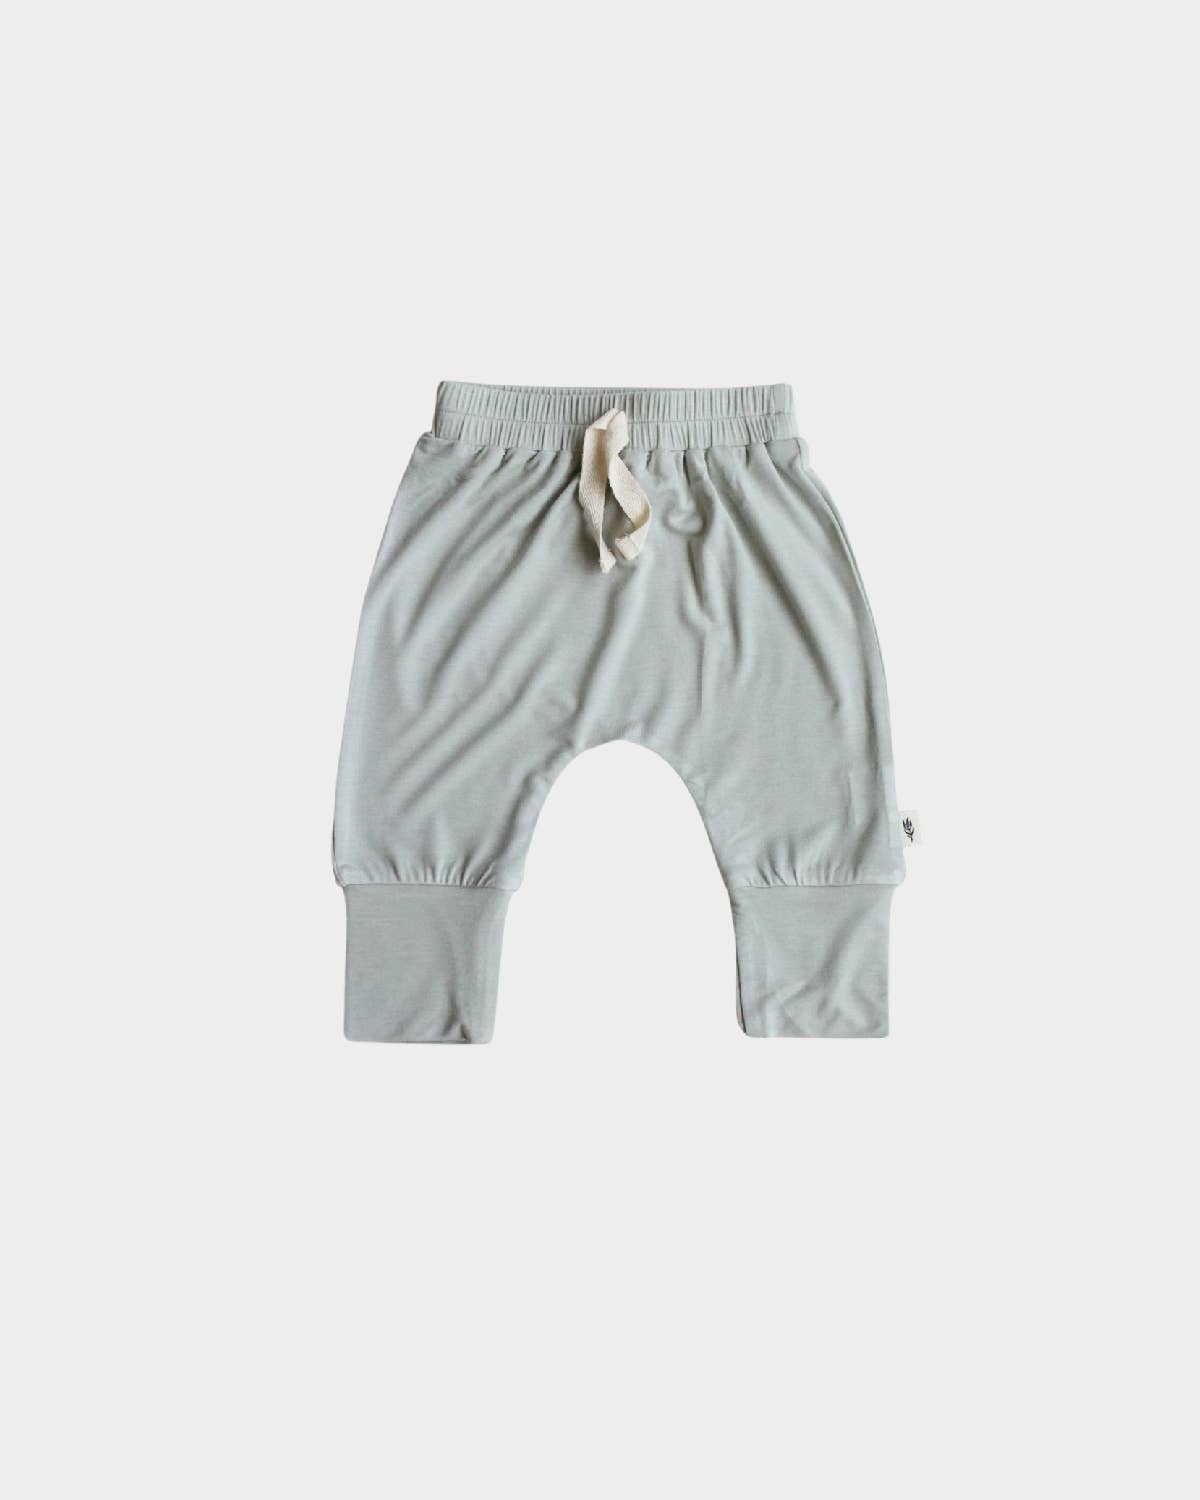 babysprouts clothing company - S23 D1: Baby Boy's Slim Harems in Sage - kennethodaniel